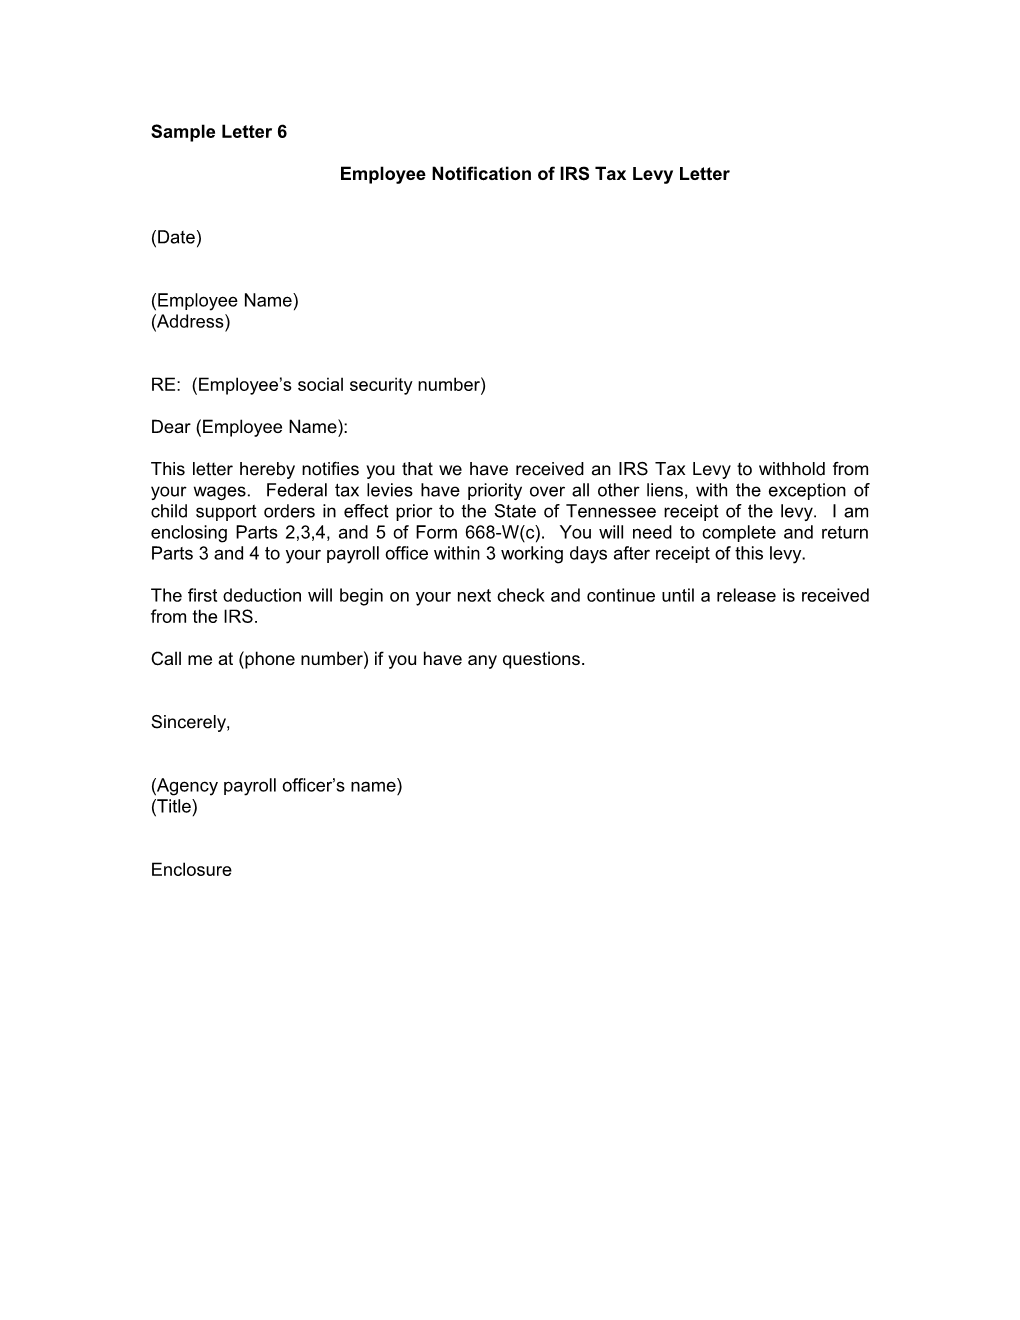 Employee Notification of IRS Tax Levy Letter